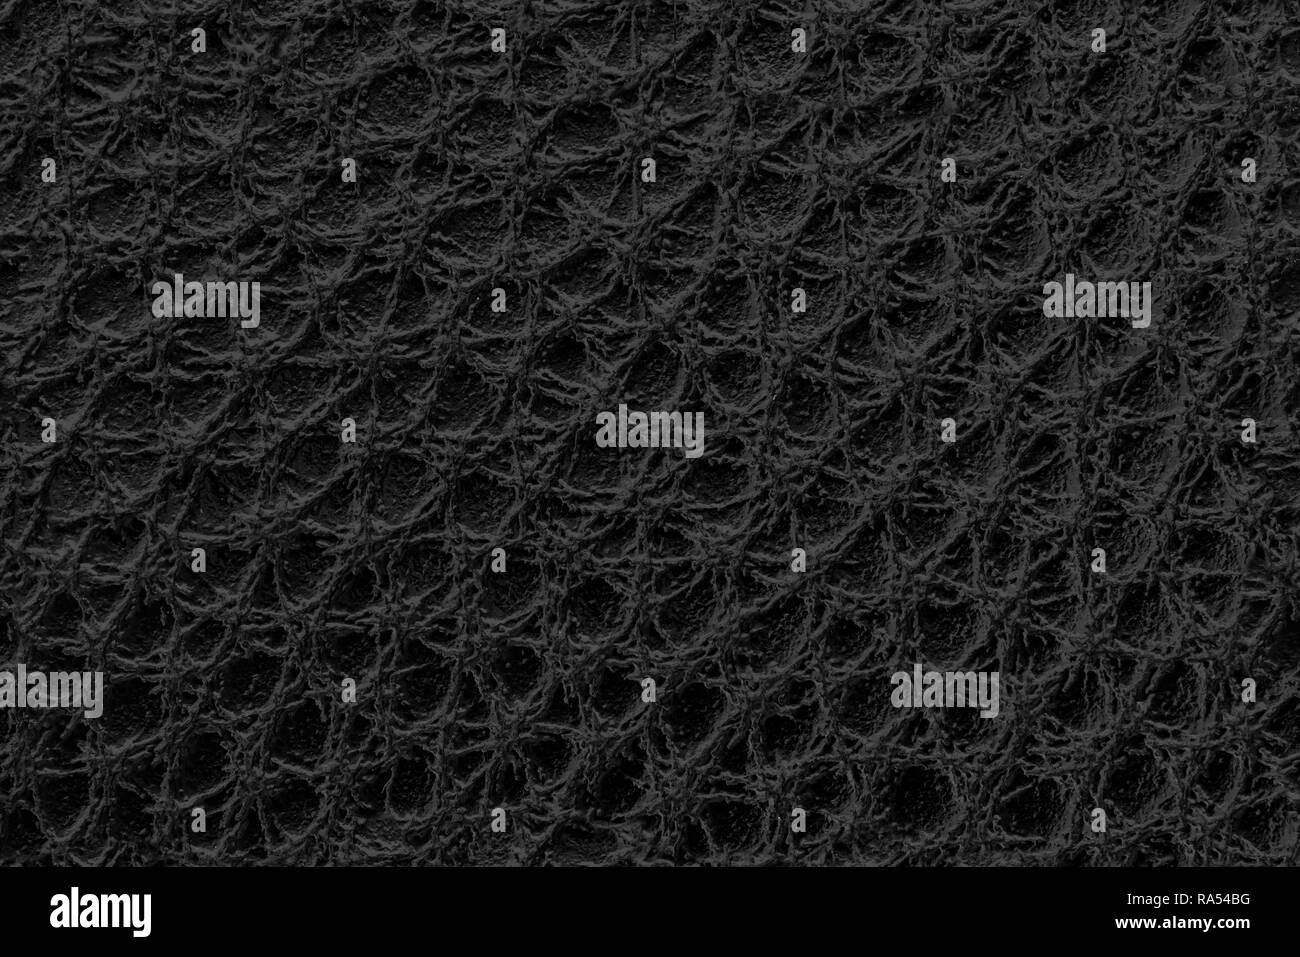 Close up of black leather as seamless texture or background Stock Photo